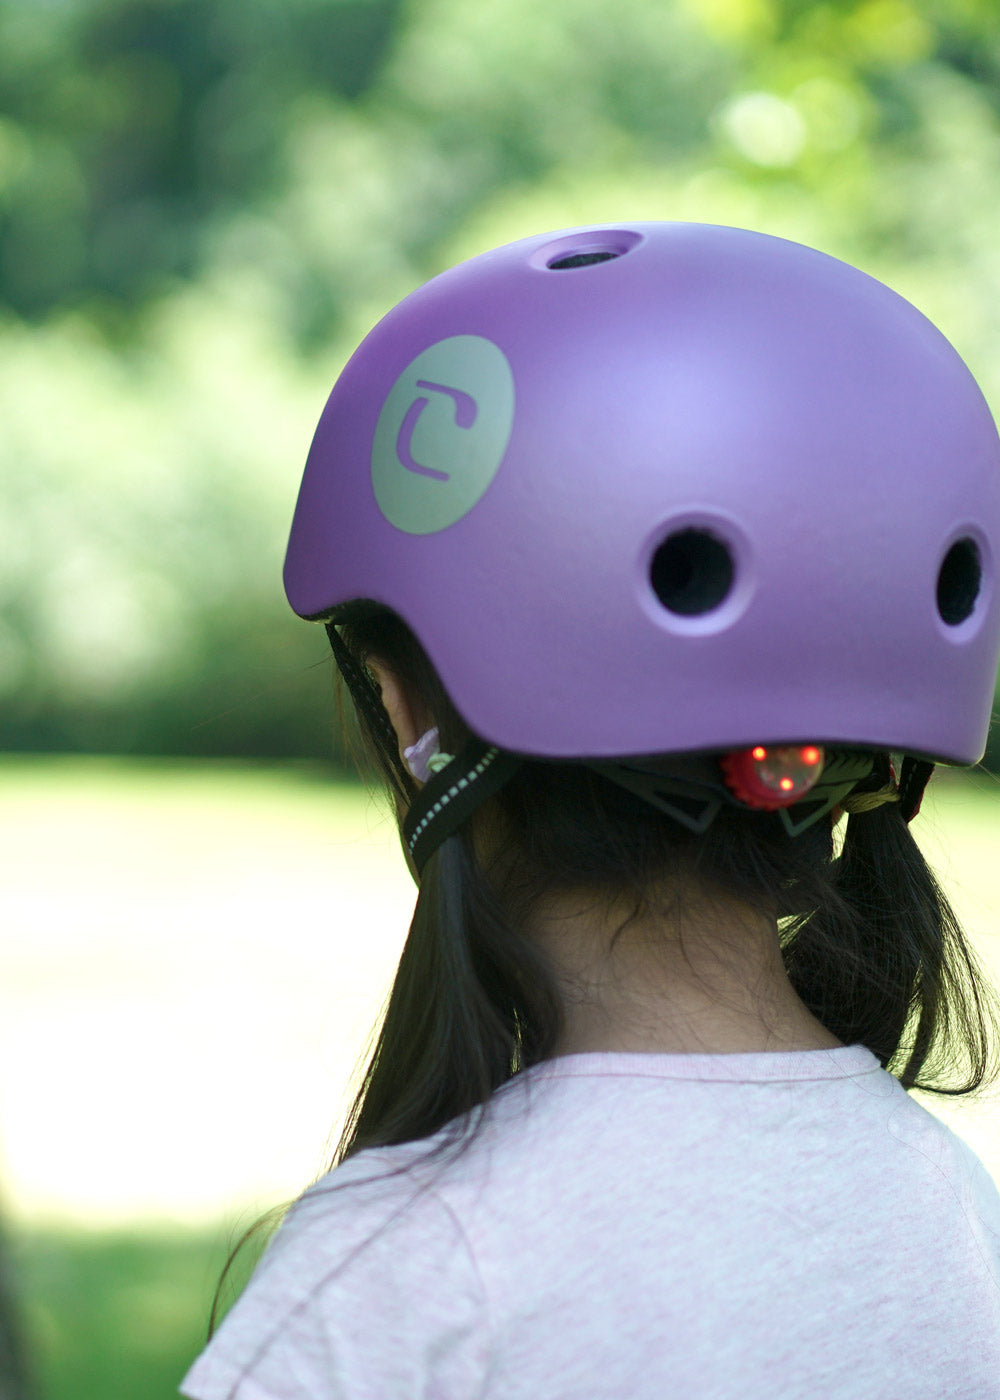 Little girl wearing a lilac helmet showing off the safety light features on the adjustable twist dial